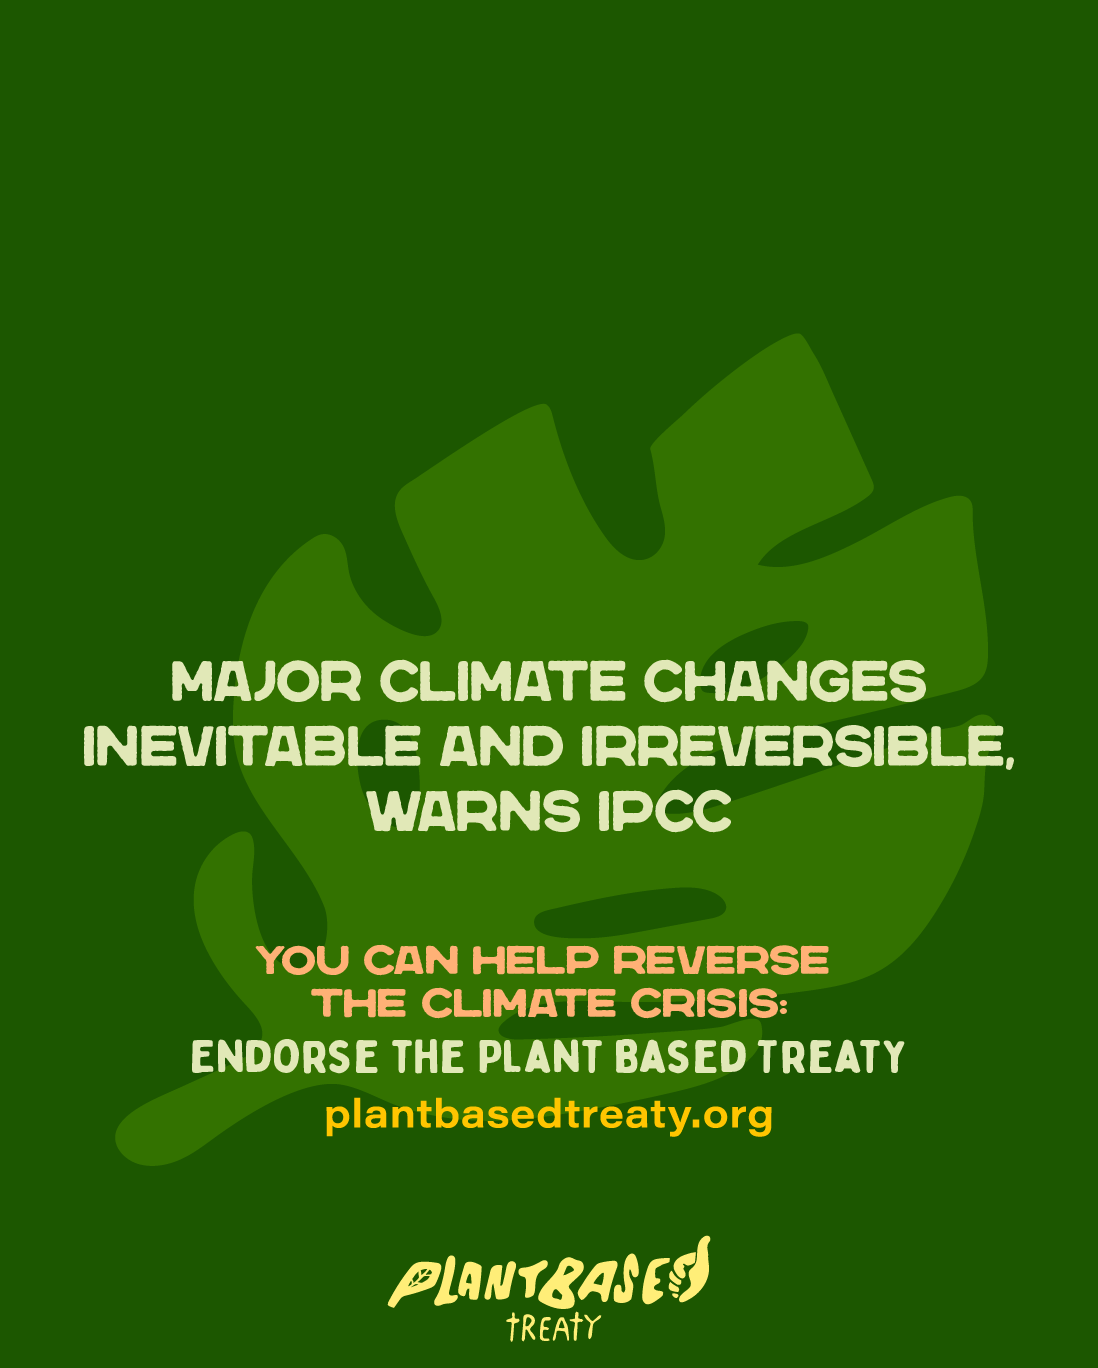 Plantbasedtreaty - climate changes